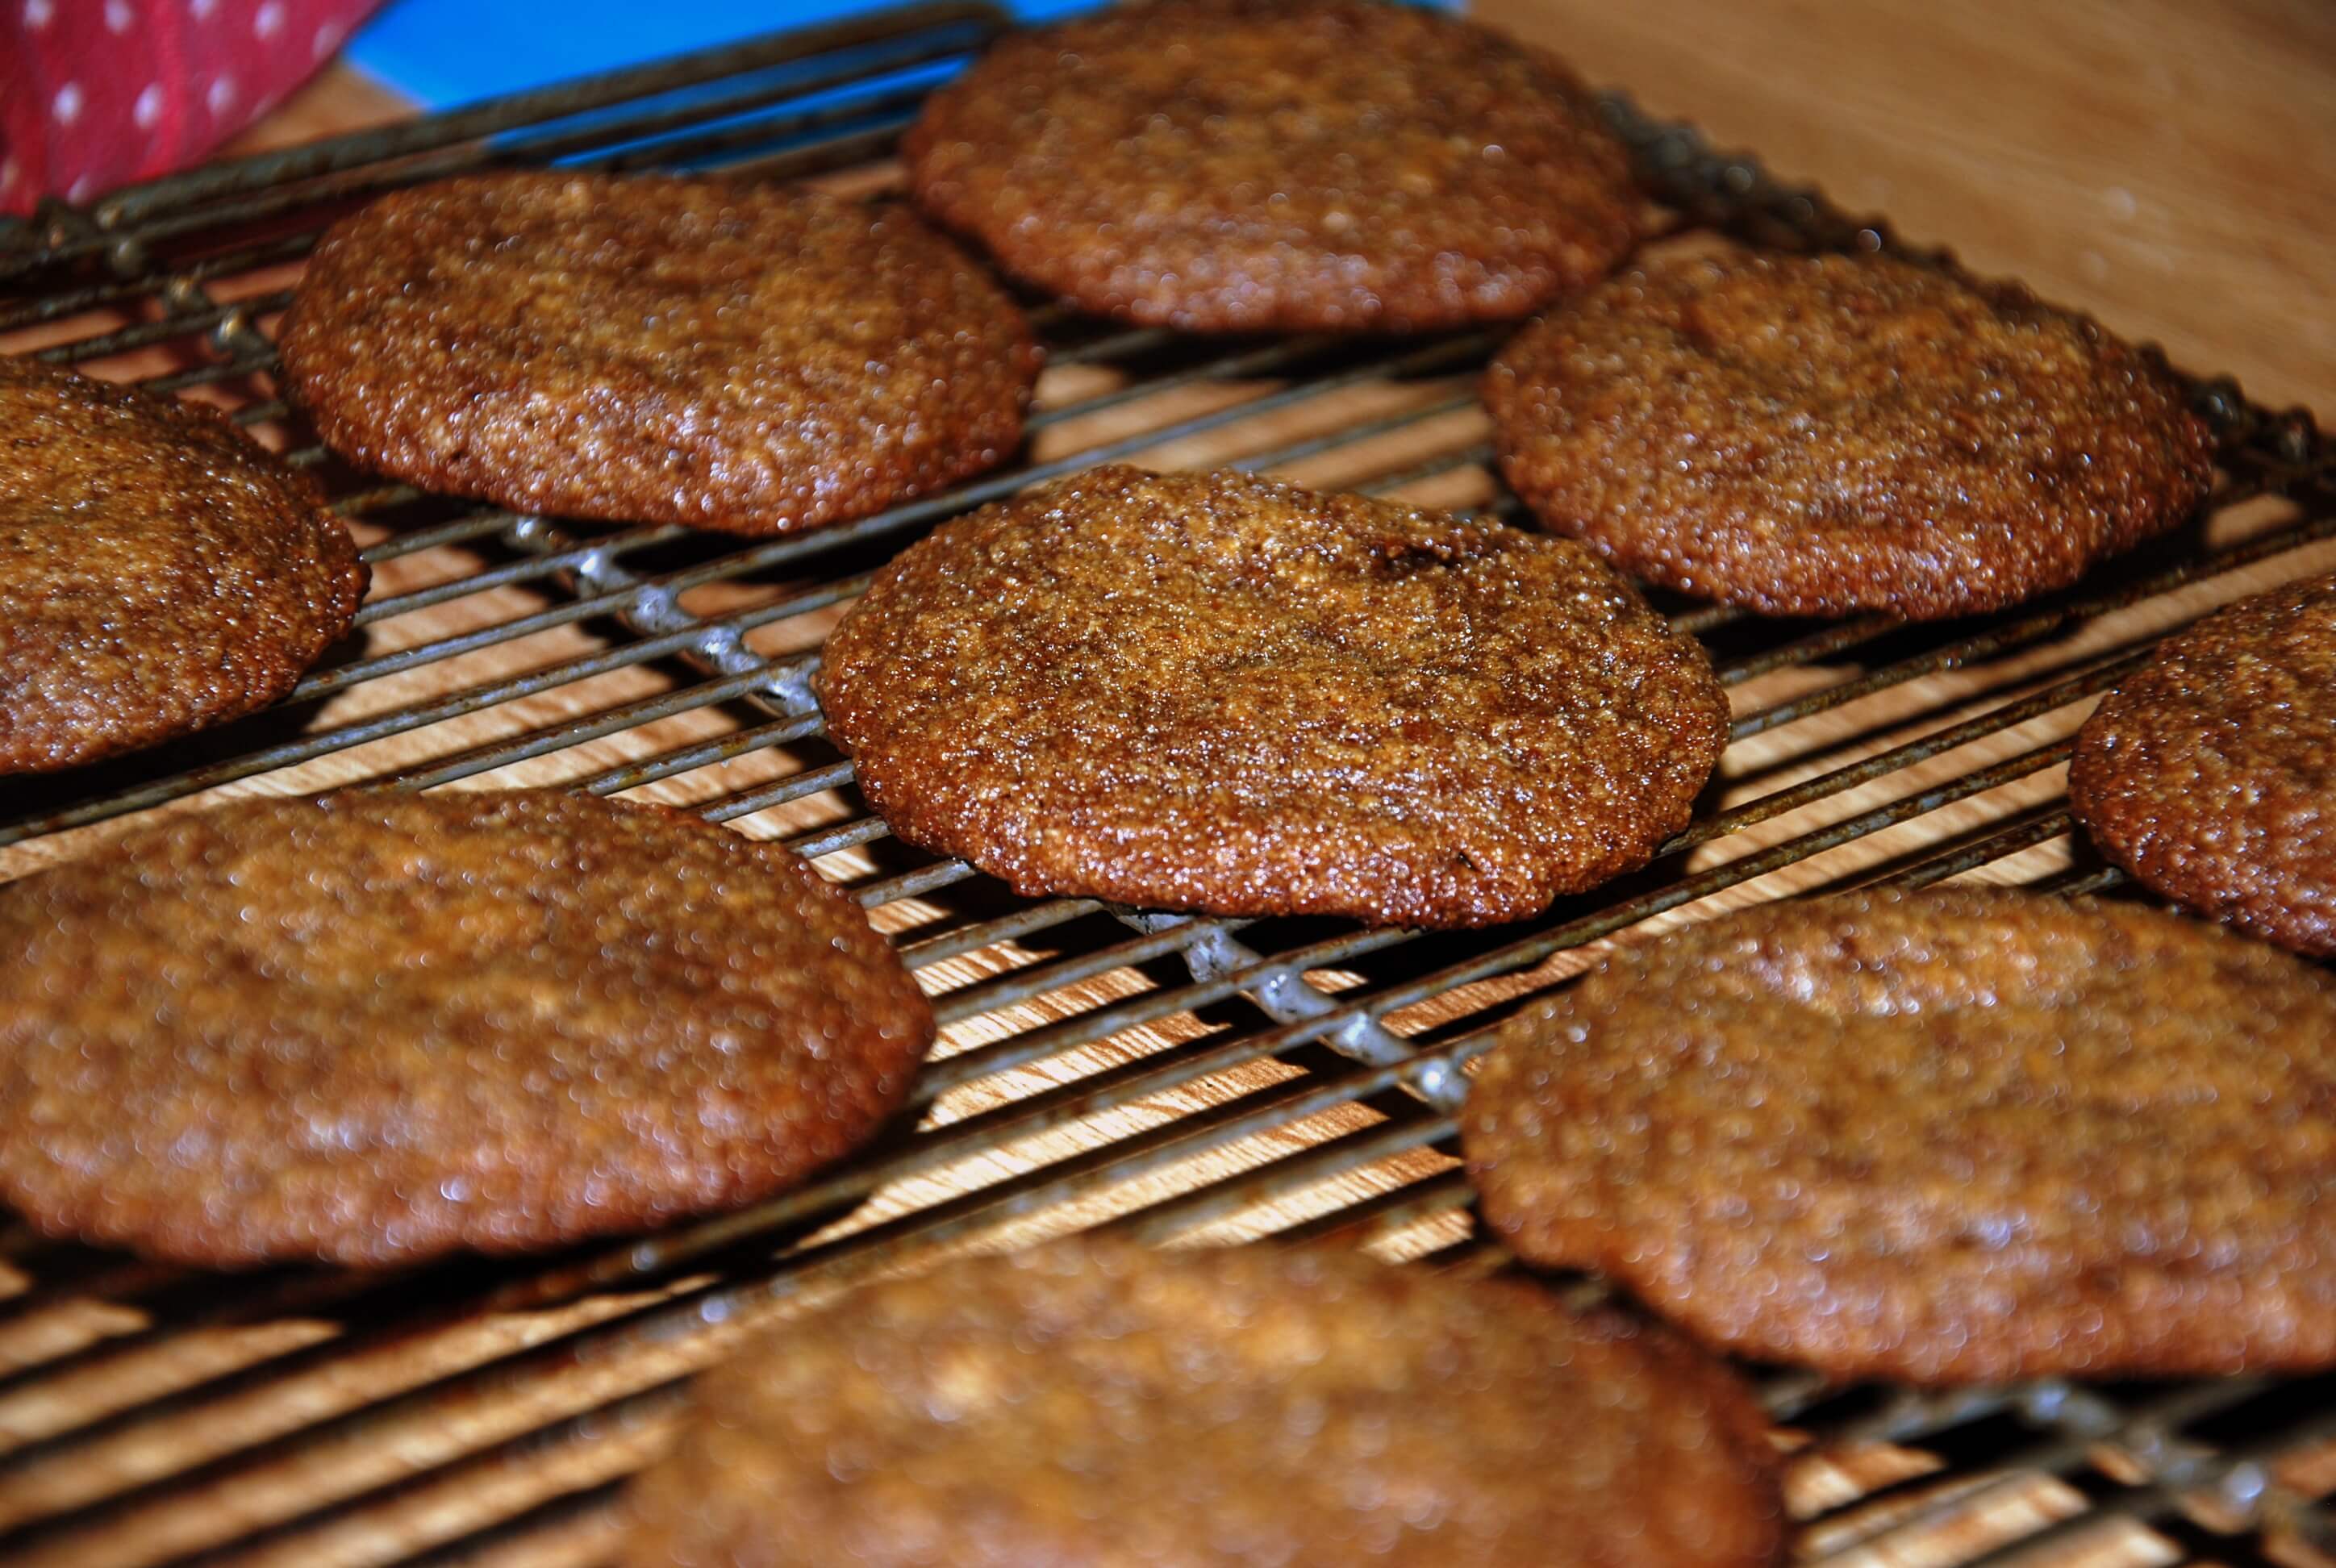 “I’m Bending the Clean-Eating Rules” Ginger Cookies